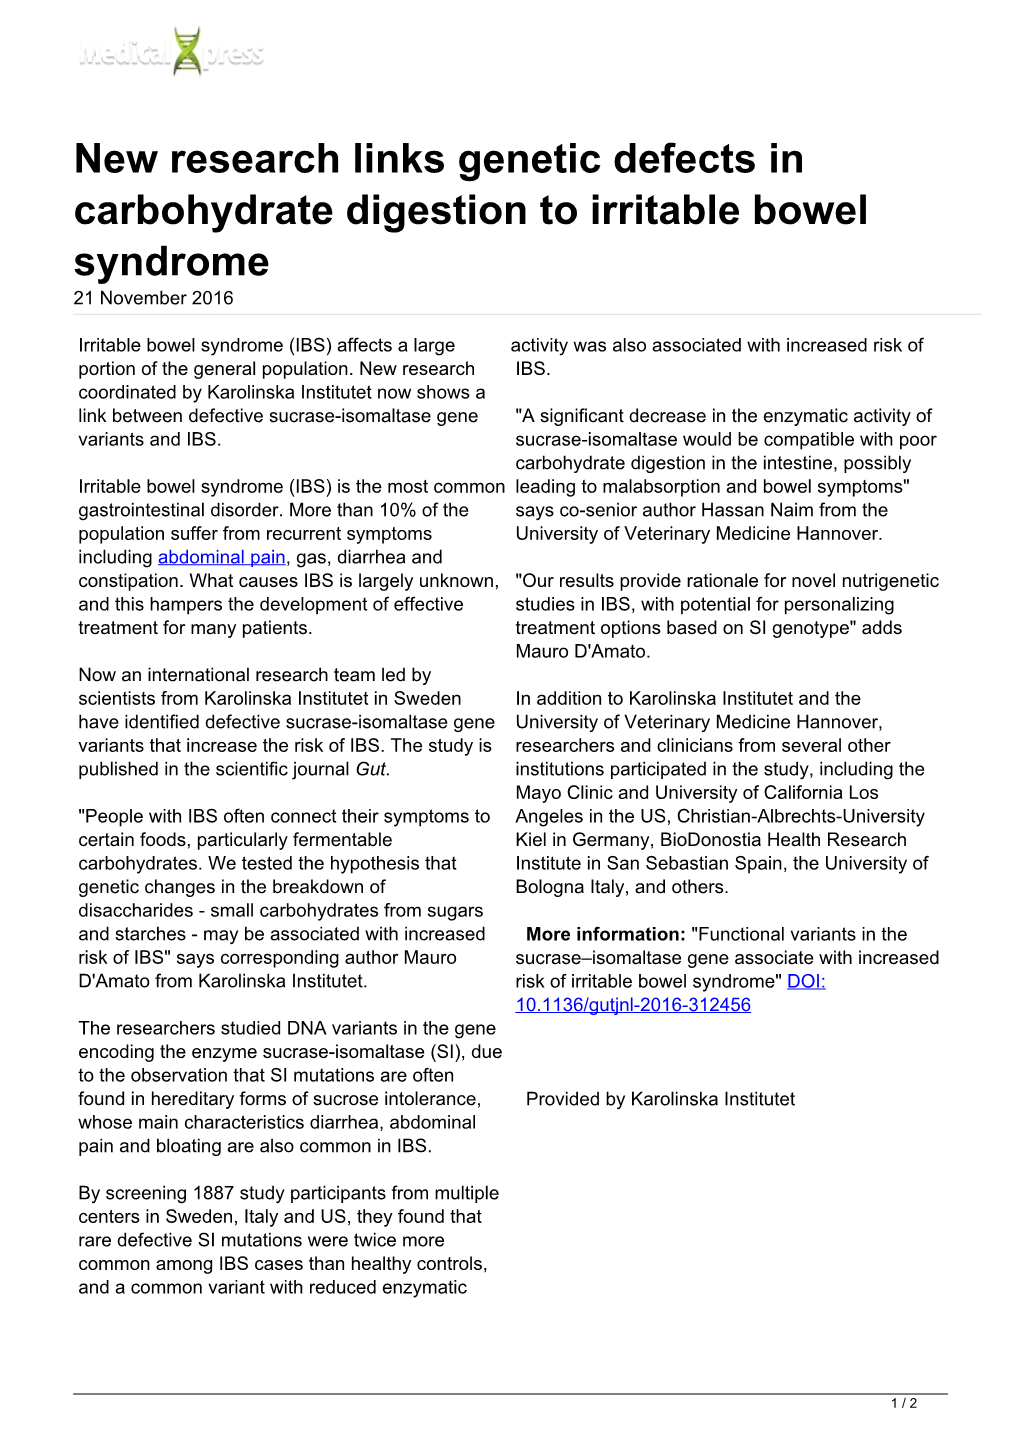 New Research Links Genetic Defects in Carbohydrate Digestion to Irritable Bowel Syndrome 21 November 2016